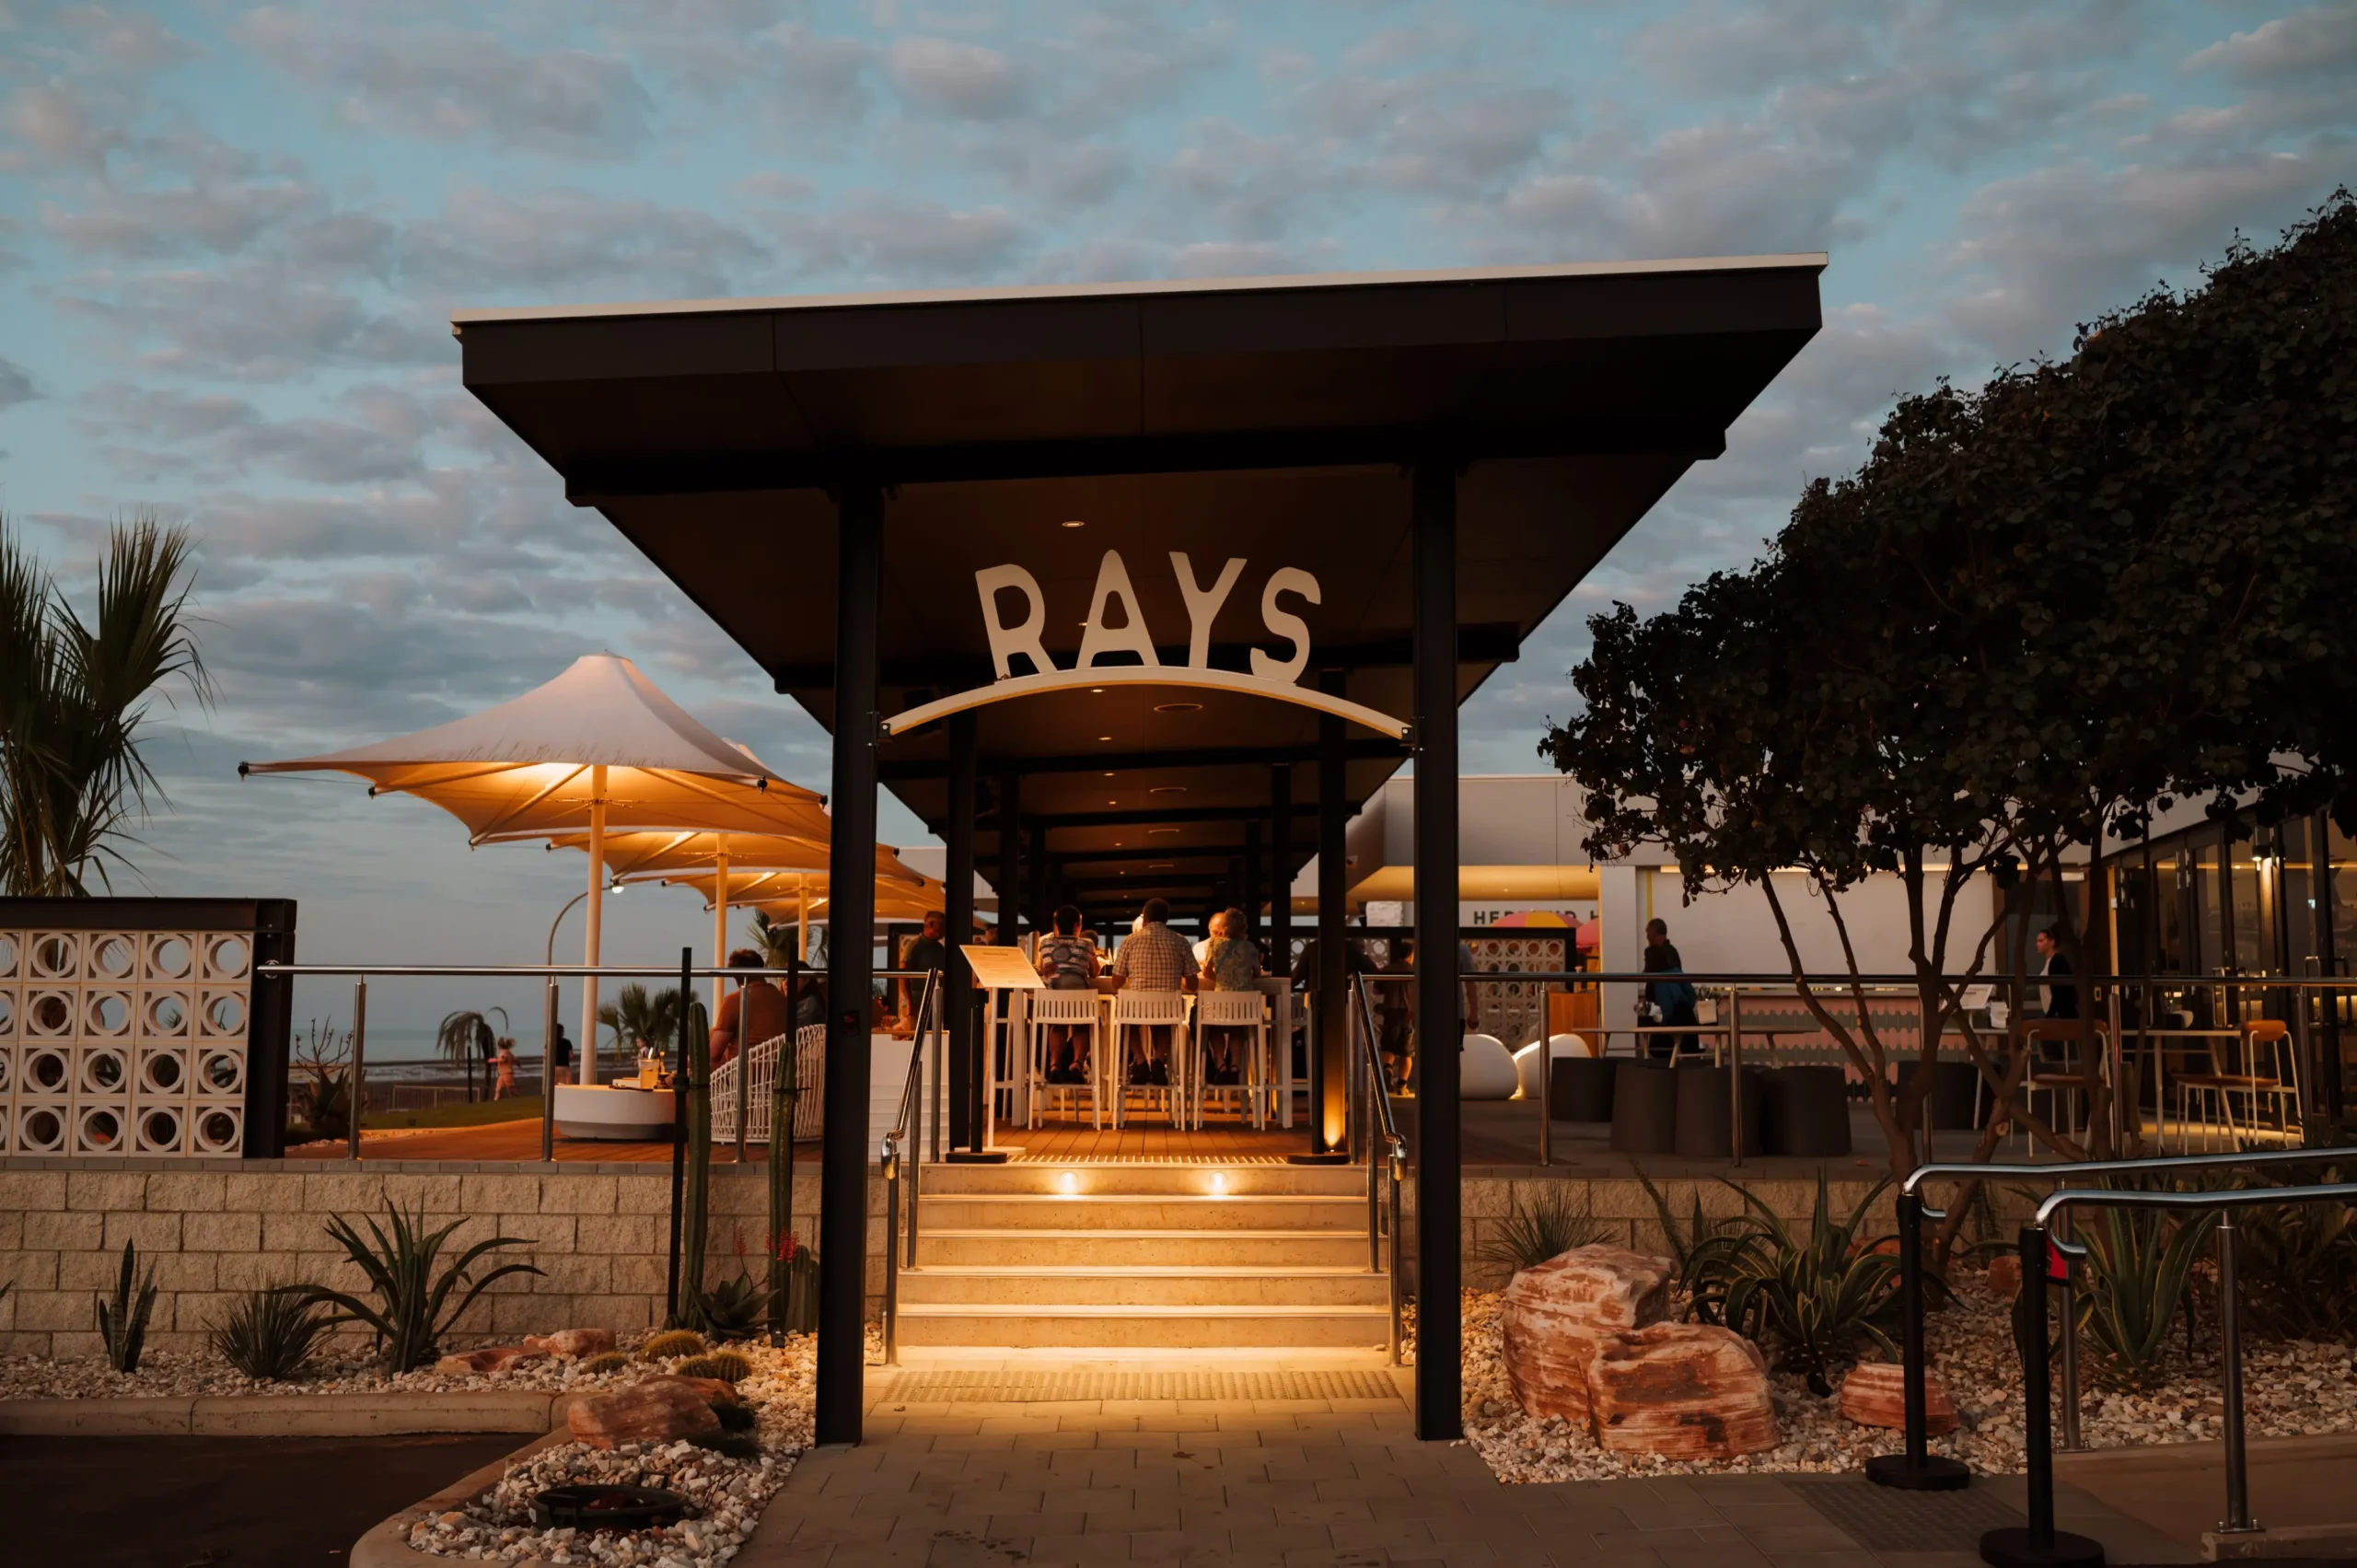 Image of the entrance to Rays Port Hedland at sunset